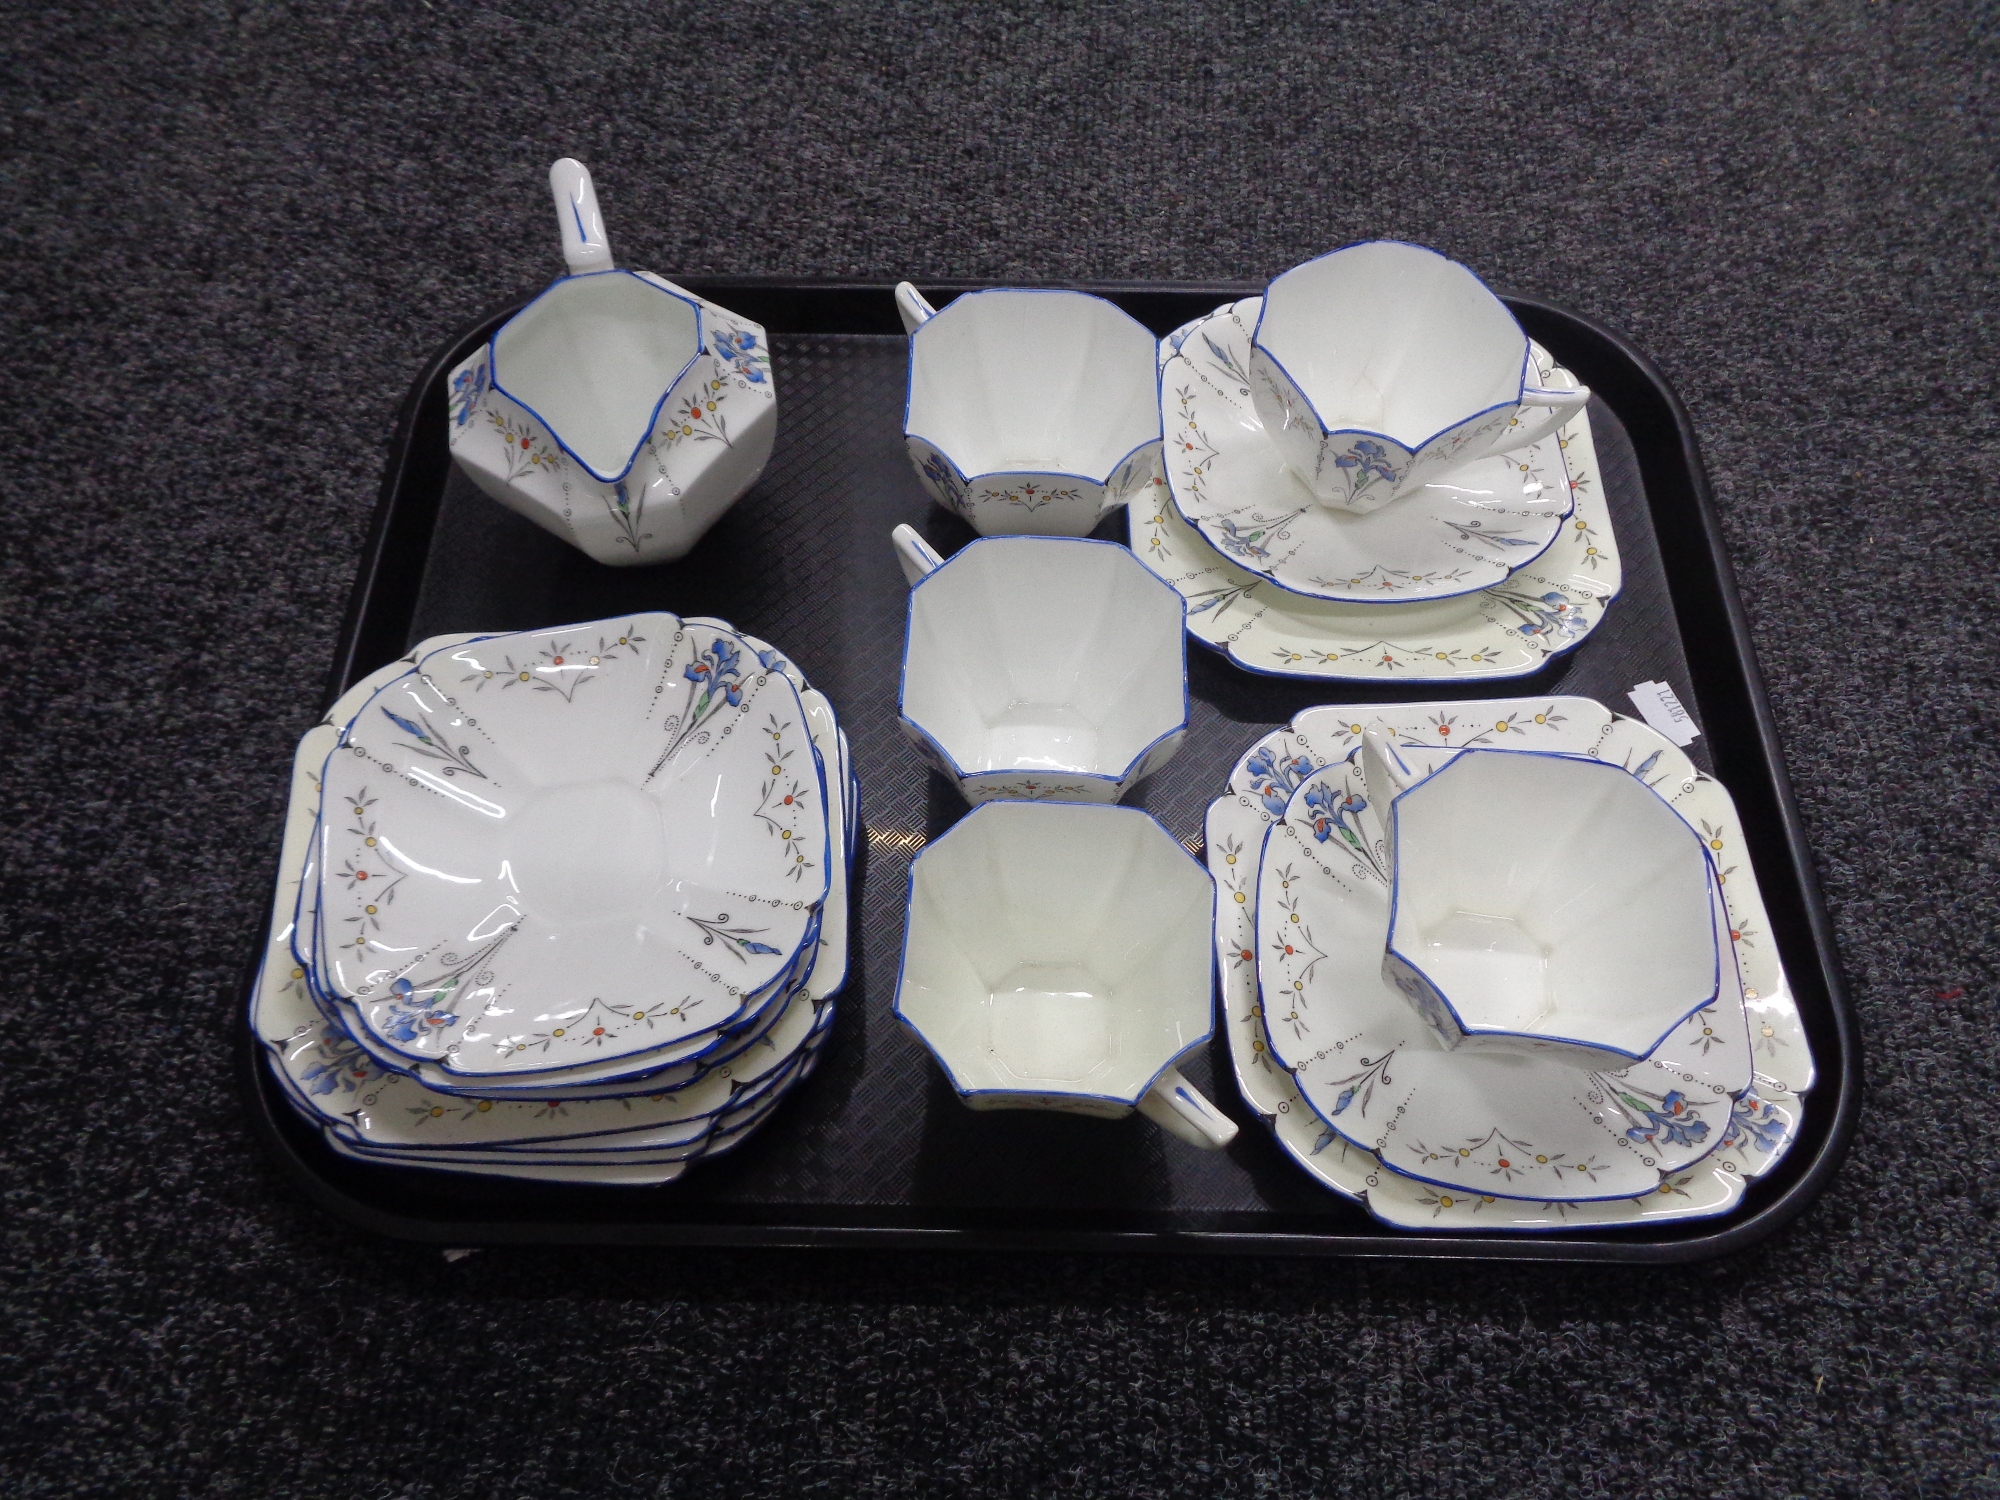 A tray containing an 18 piece Shelley hand painted bone china tea service.